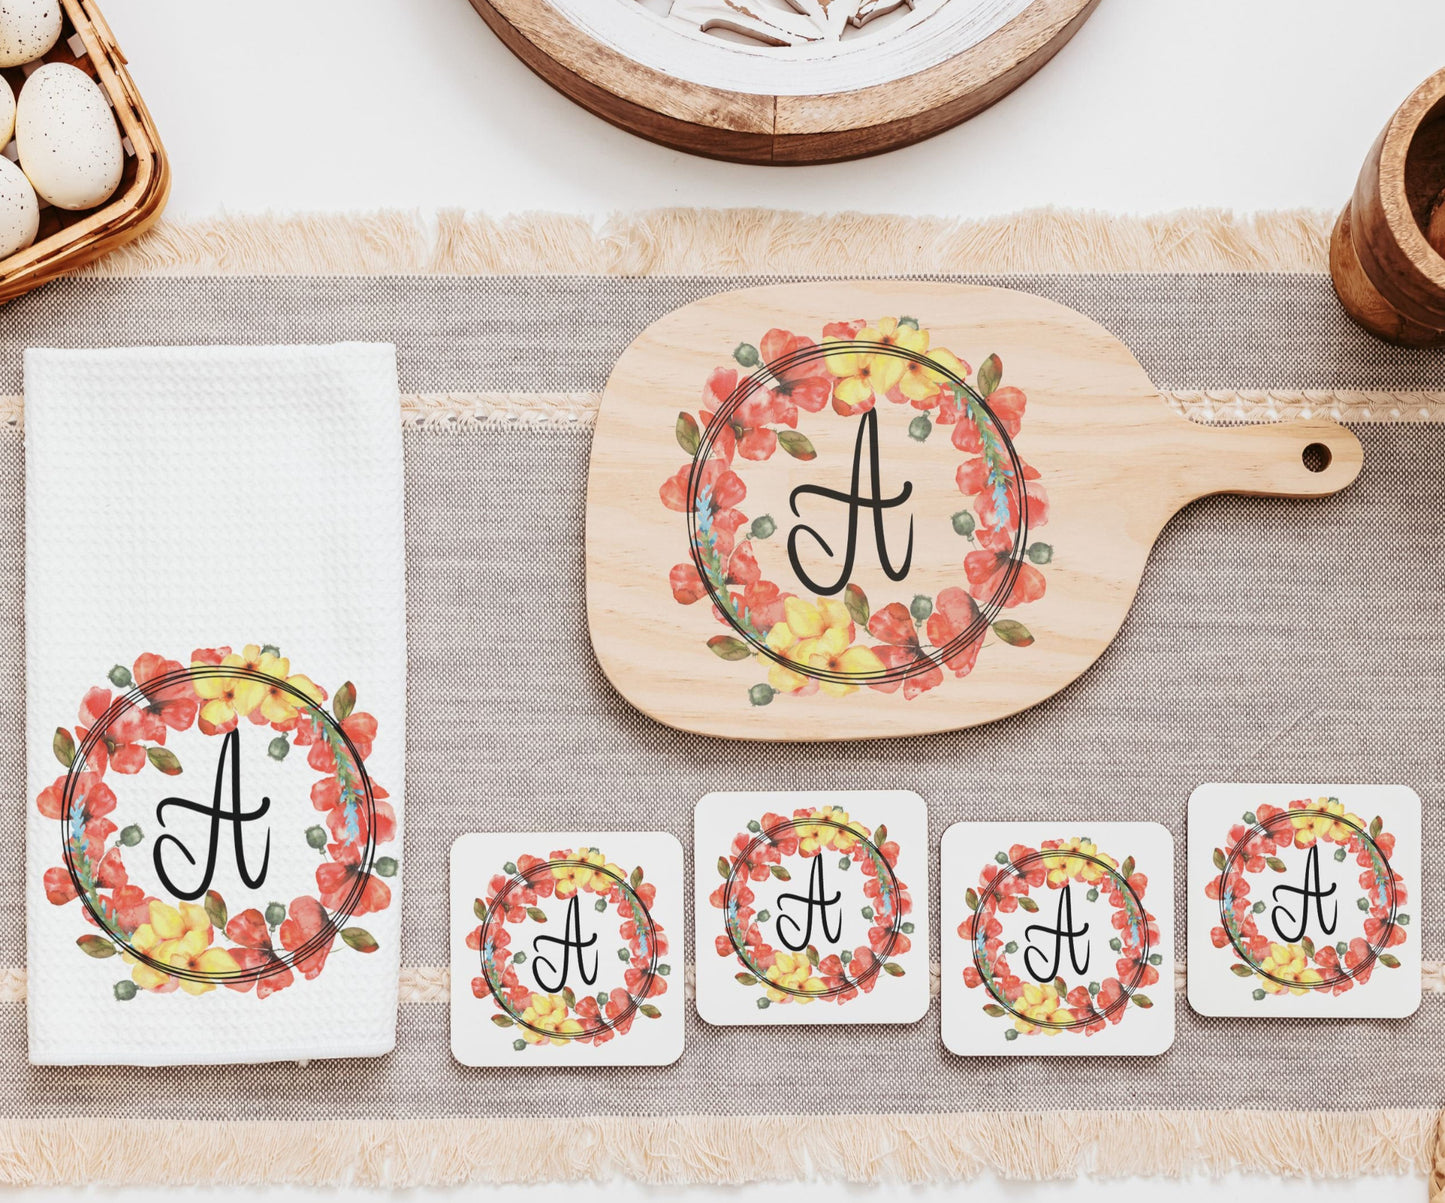 Personalized poppy cutting boards, towel, and coaster set